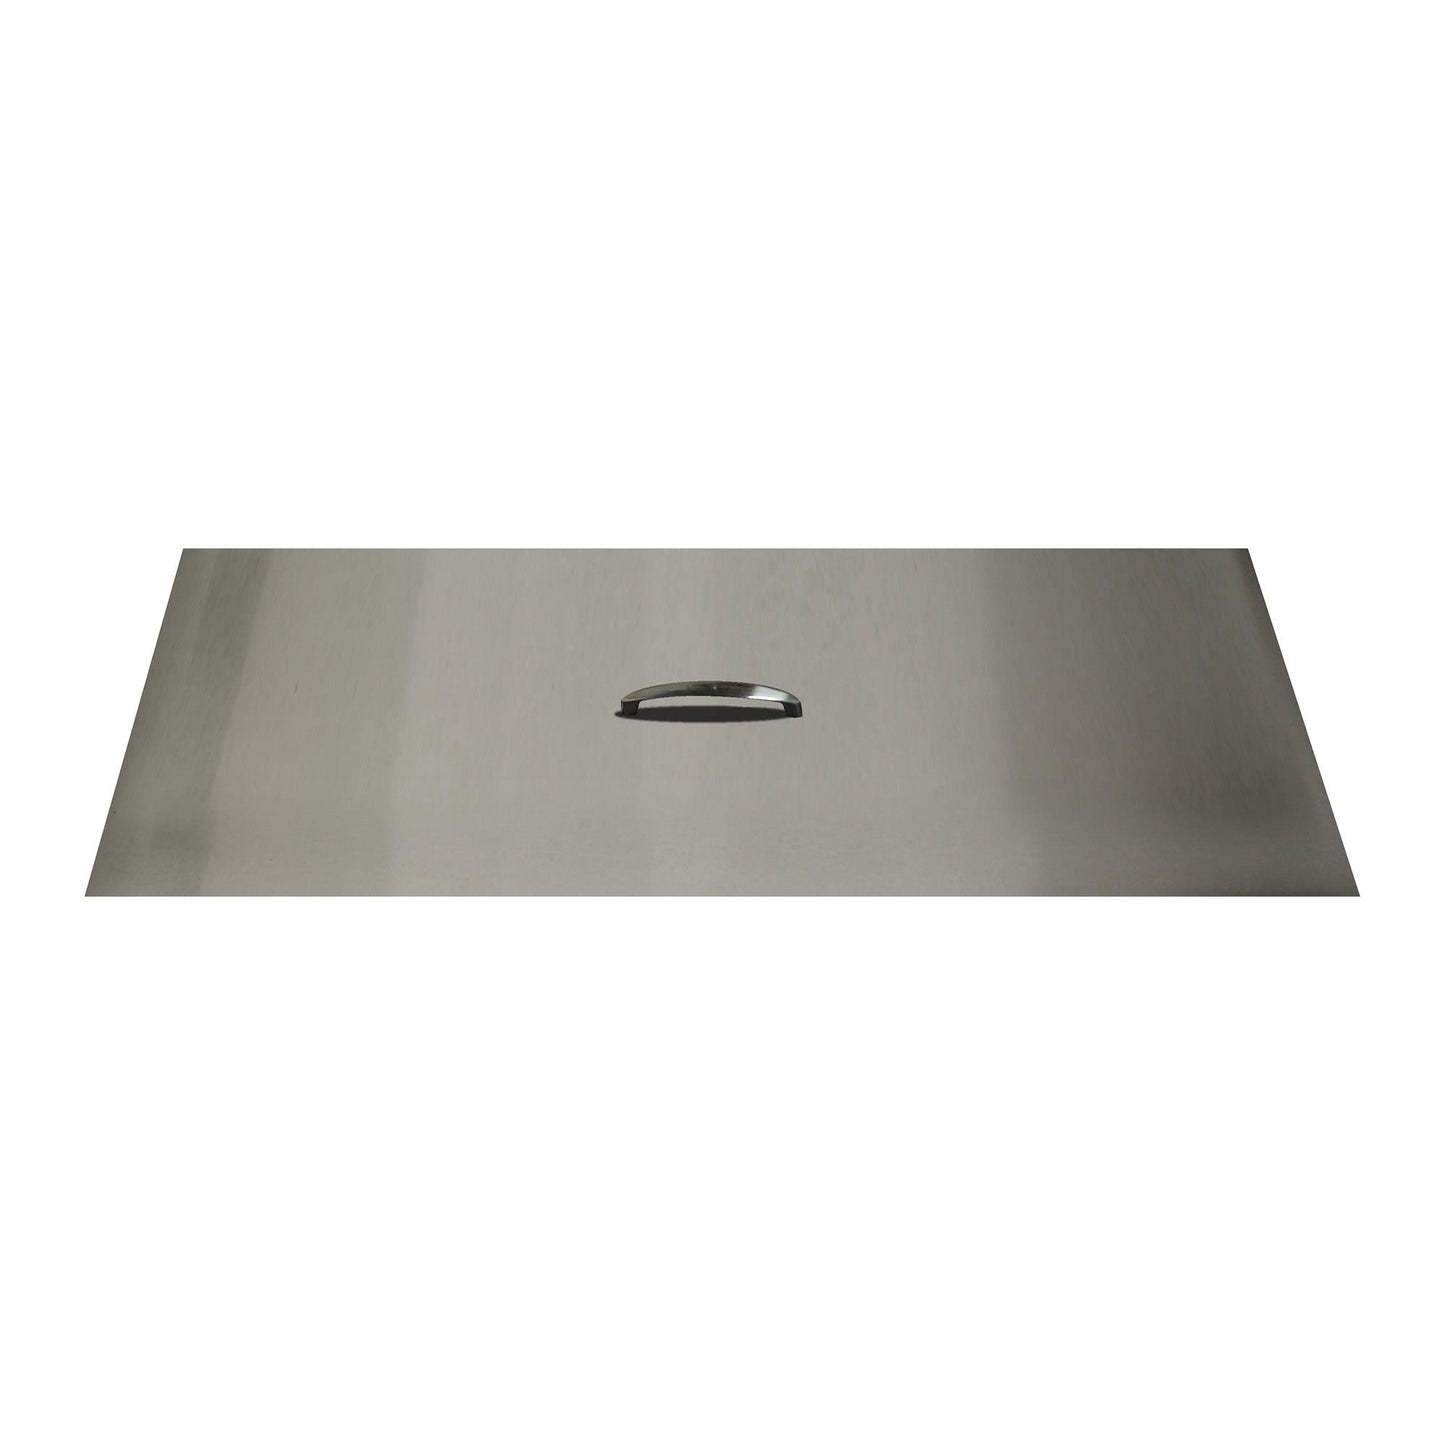 The Outdoor Plus 10" x 88" Stainless Steel Rectangular Fire Pit Lid Cover